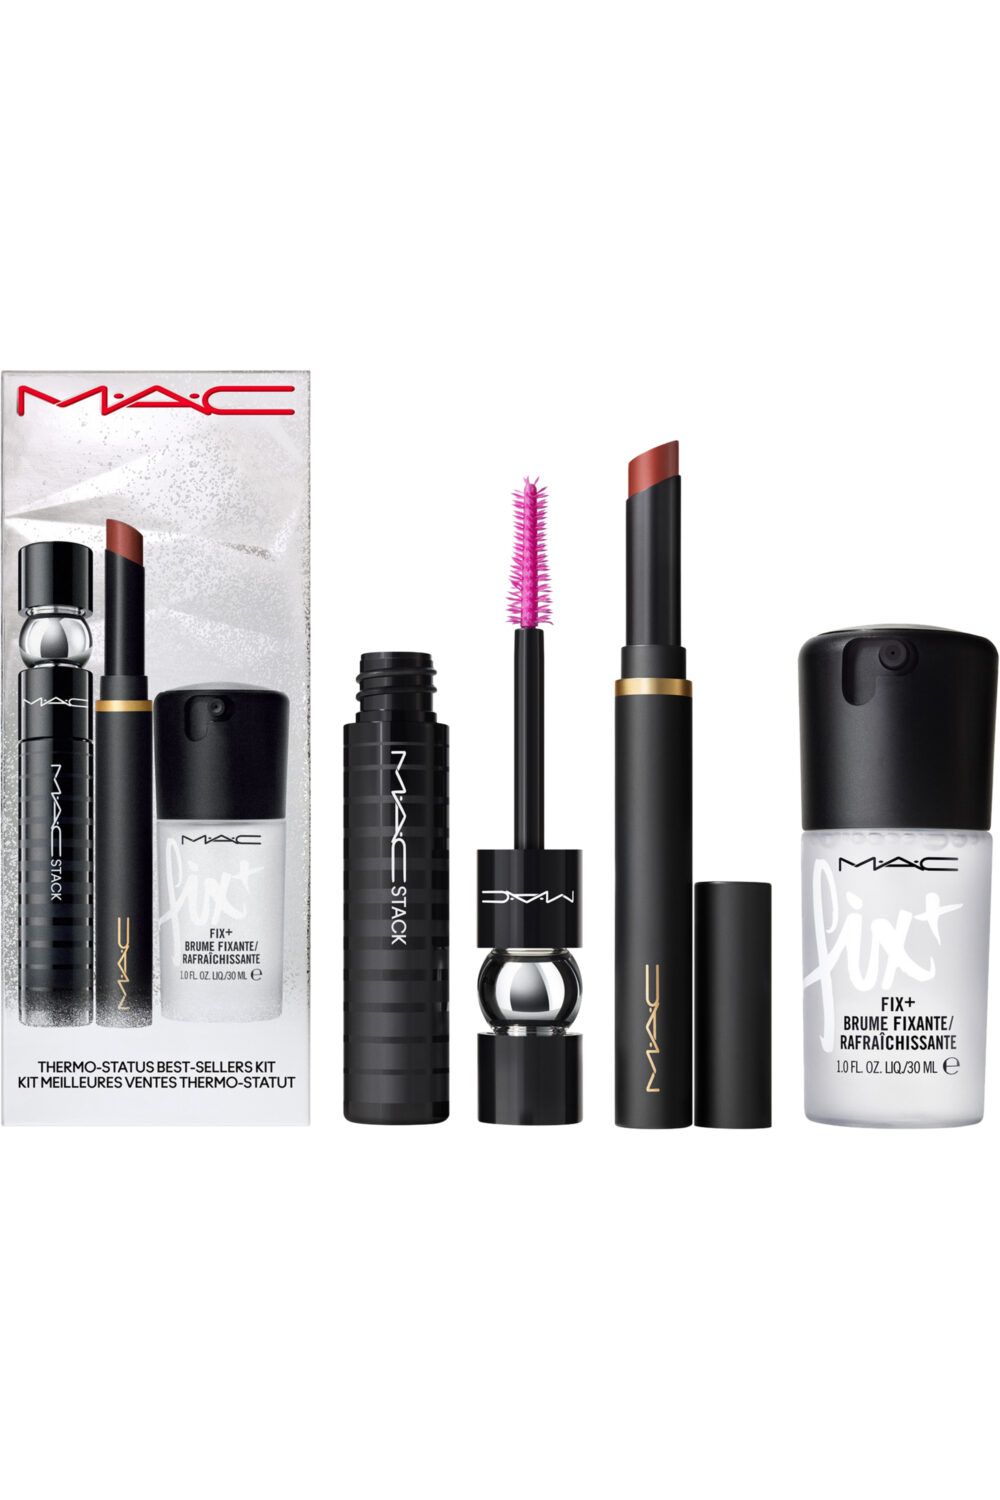 M.A.C - Coffret maquillage best-sellers Thermo-Status